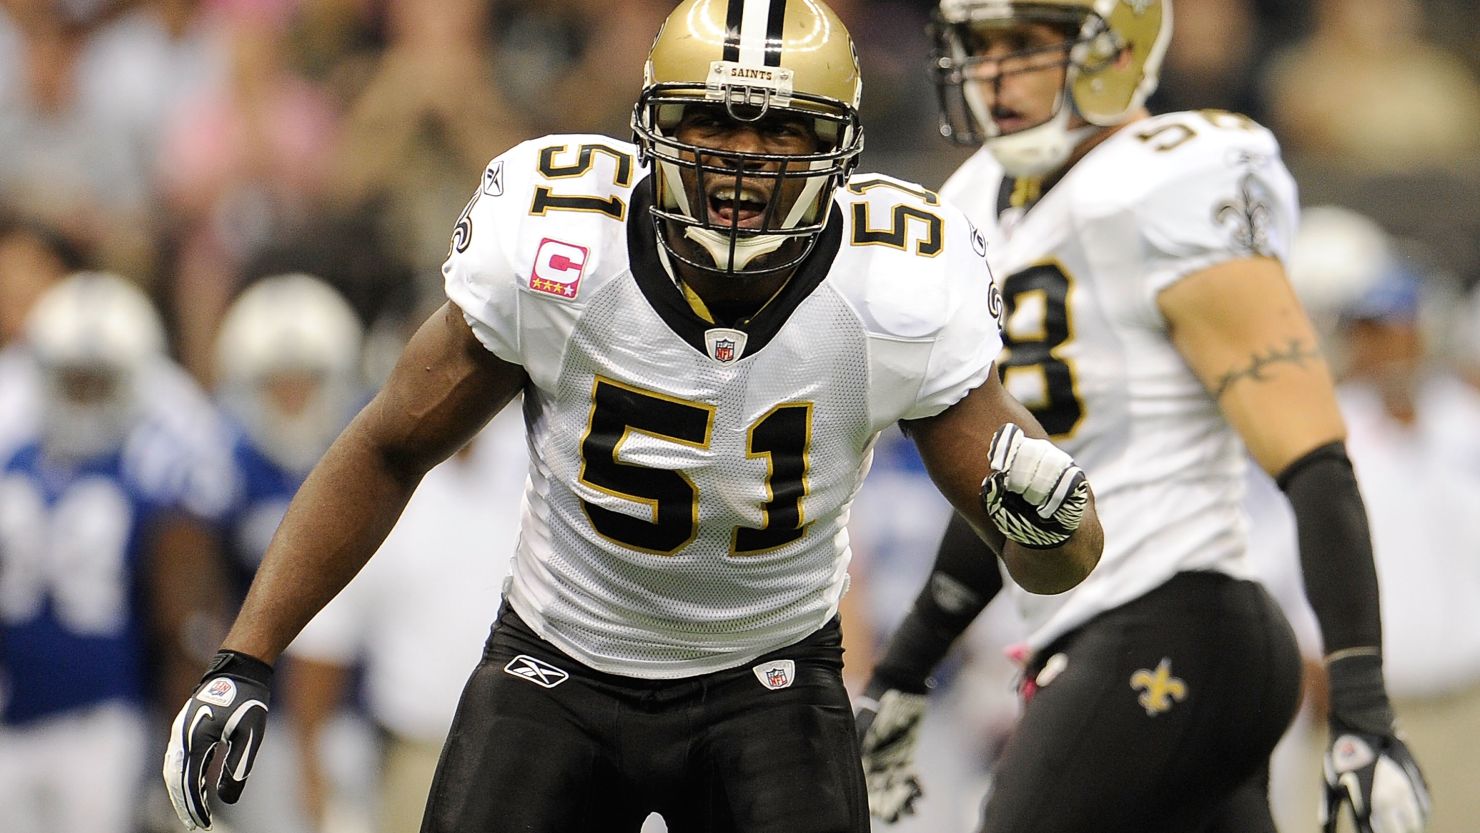 The Saints' Jonathan Vilma will sit out the season after all, according to an NFL decision Tuesday.